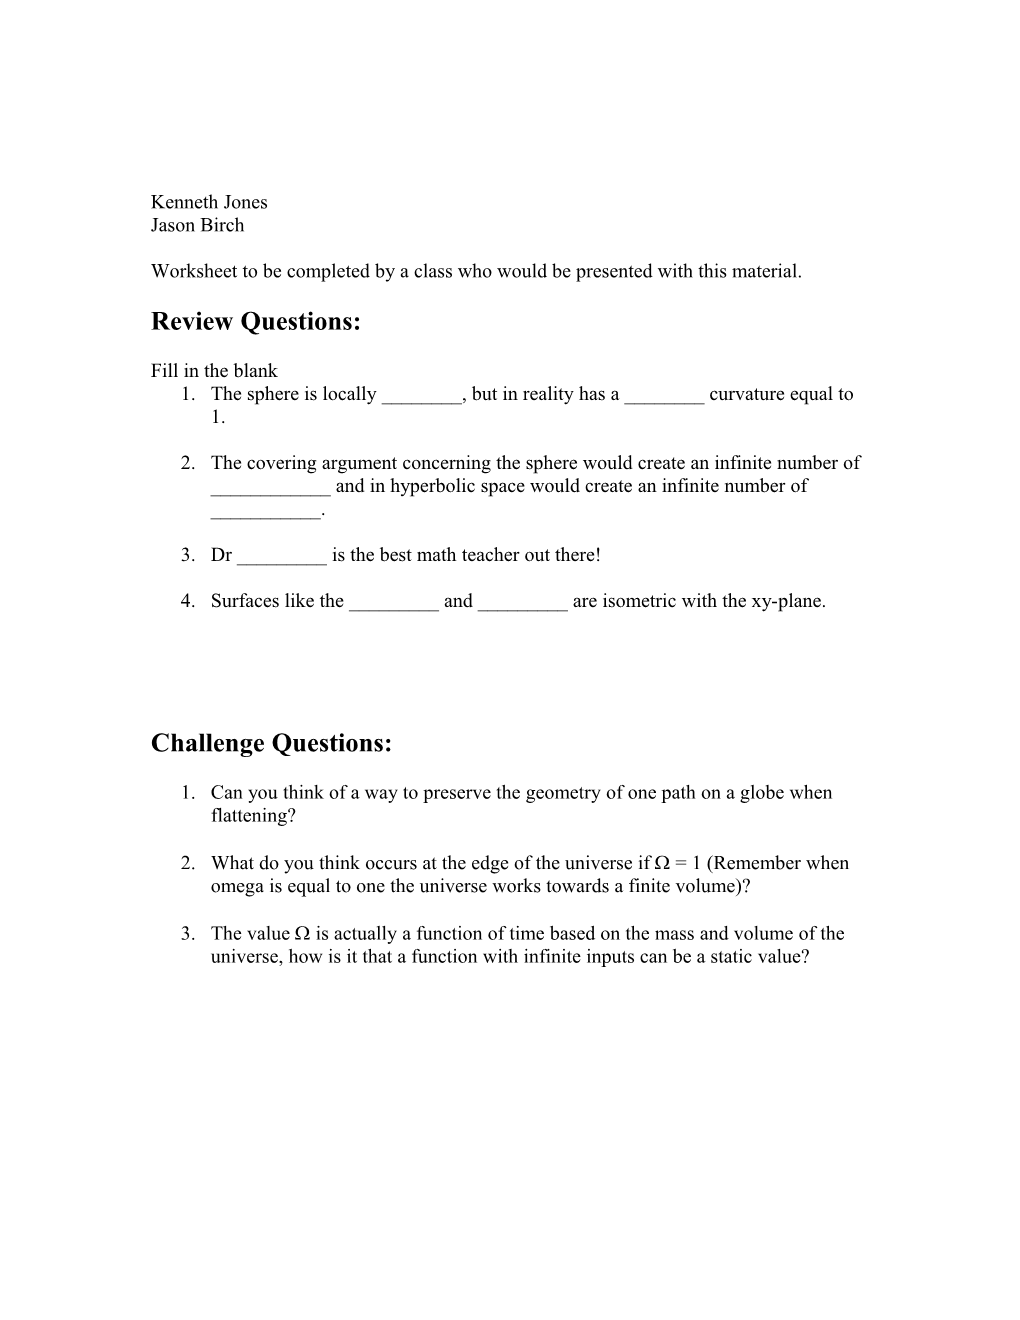 Worksheet to Be Completed by a Class Who Would Be Presented with This Material